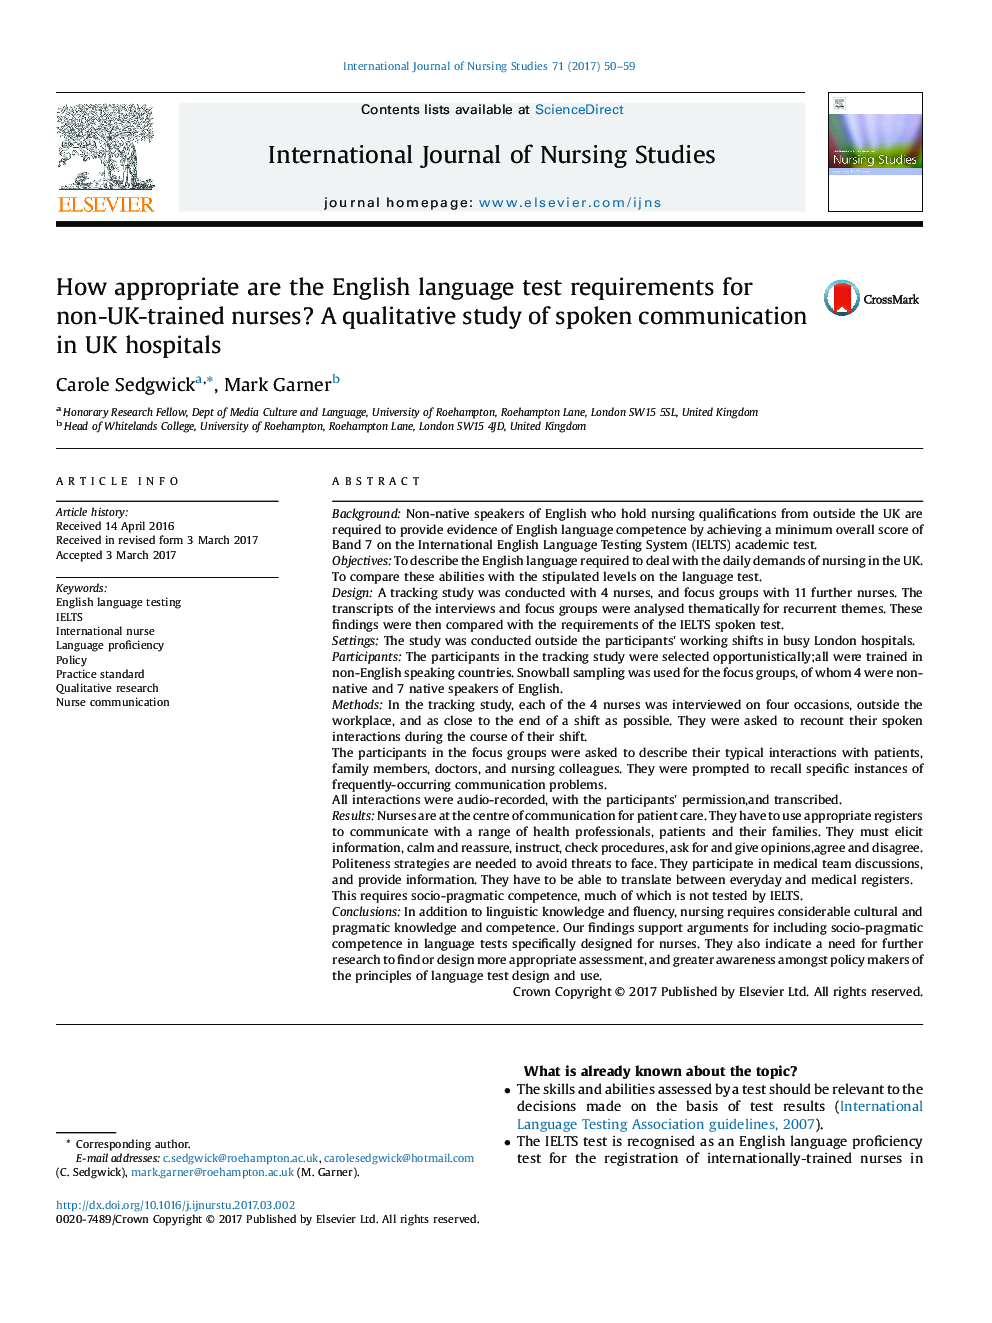 How appropriate are the English language test requirements for non-UK-trained nurses? A qualitative study of spoken communication in UK hospitals